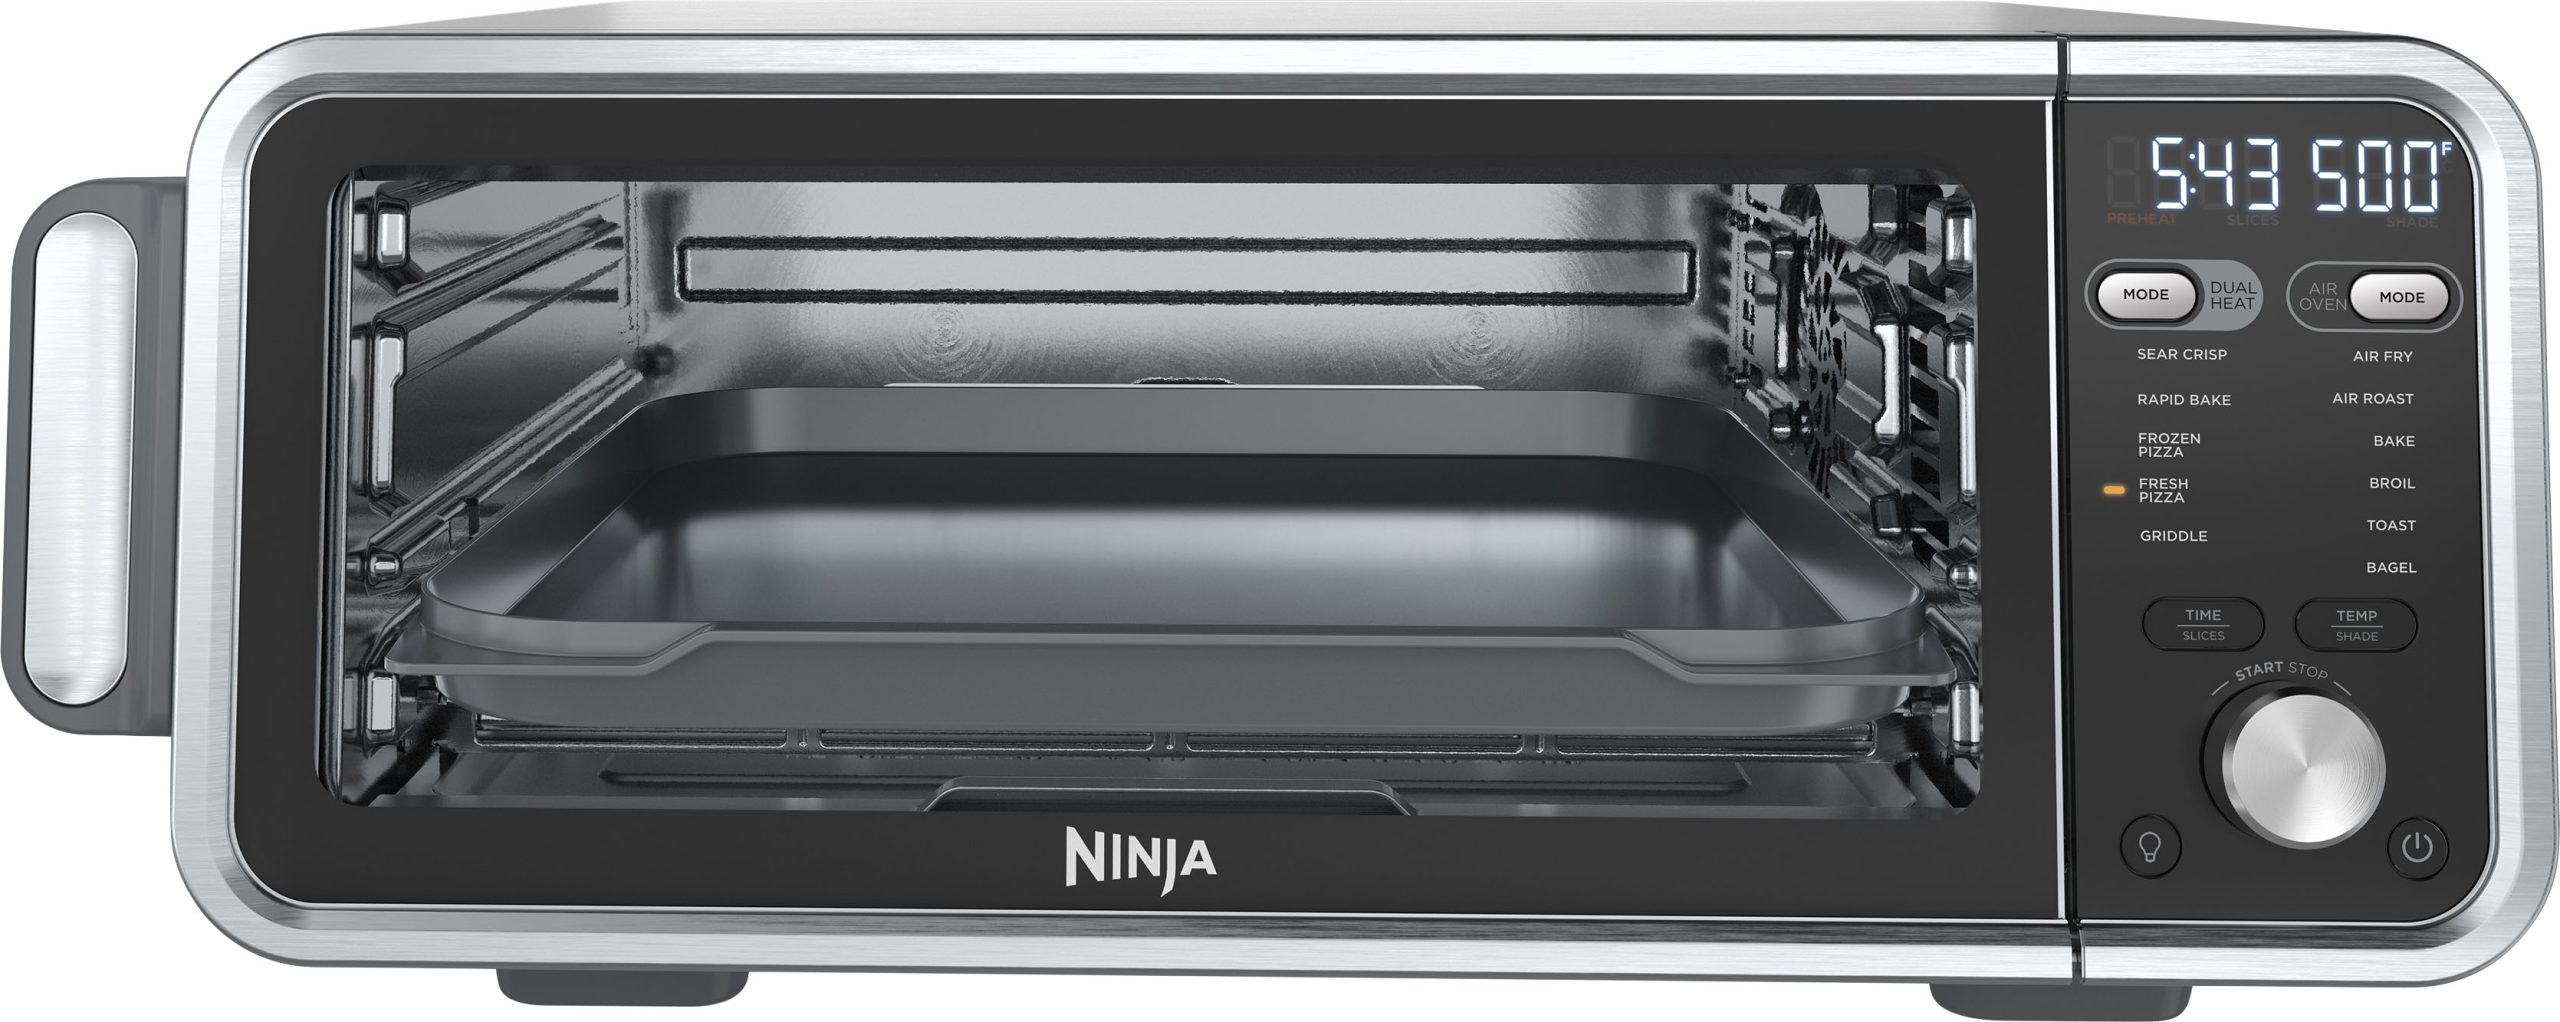 Ninja – Foodi Convection Toaster Oven with 11-in-1 Functionality with Dual Heat Technology and Flip functionality – Just $149.99 at Best Buy